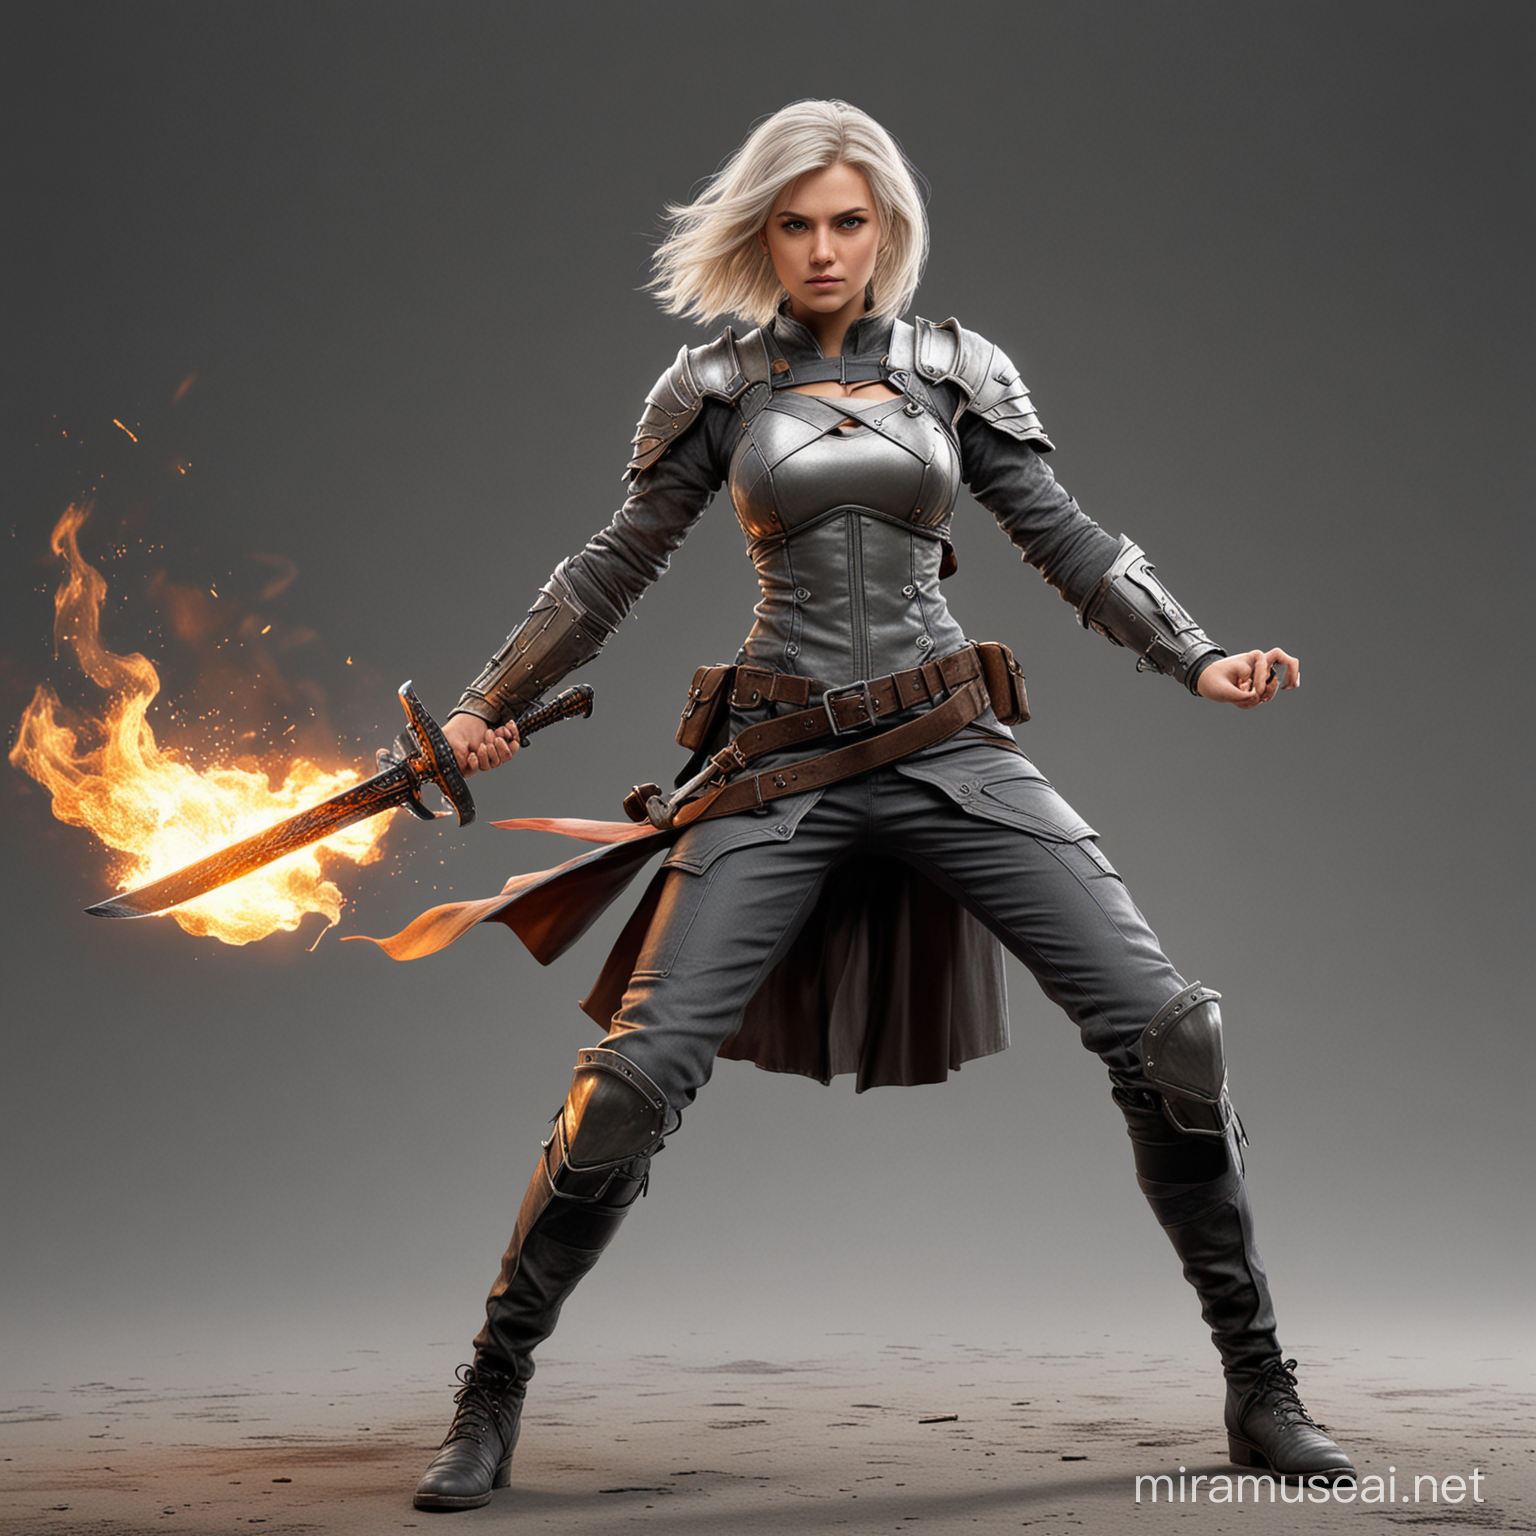 Elegant Blonde Spellsword in Dynamic Combat Stance with Fiery Magic